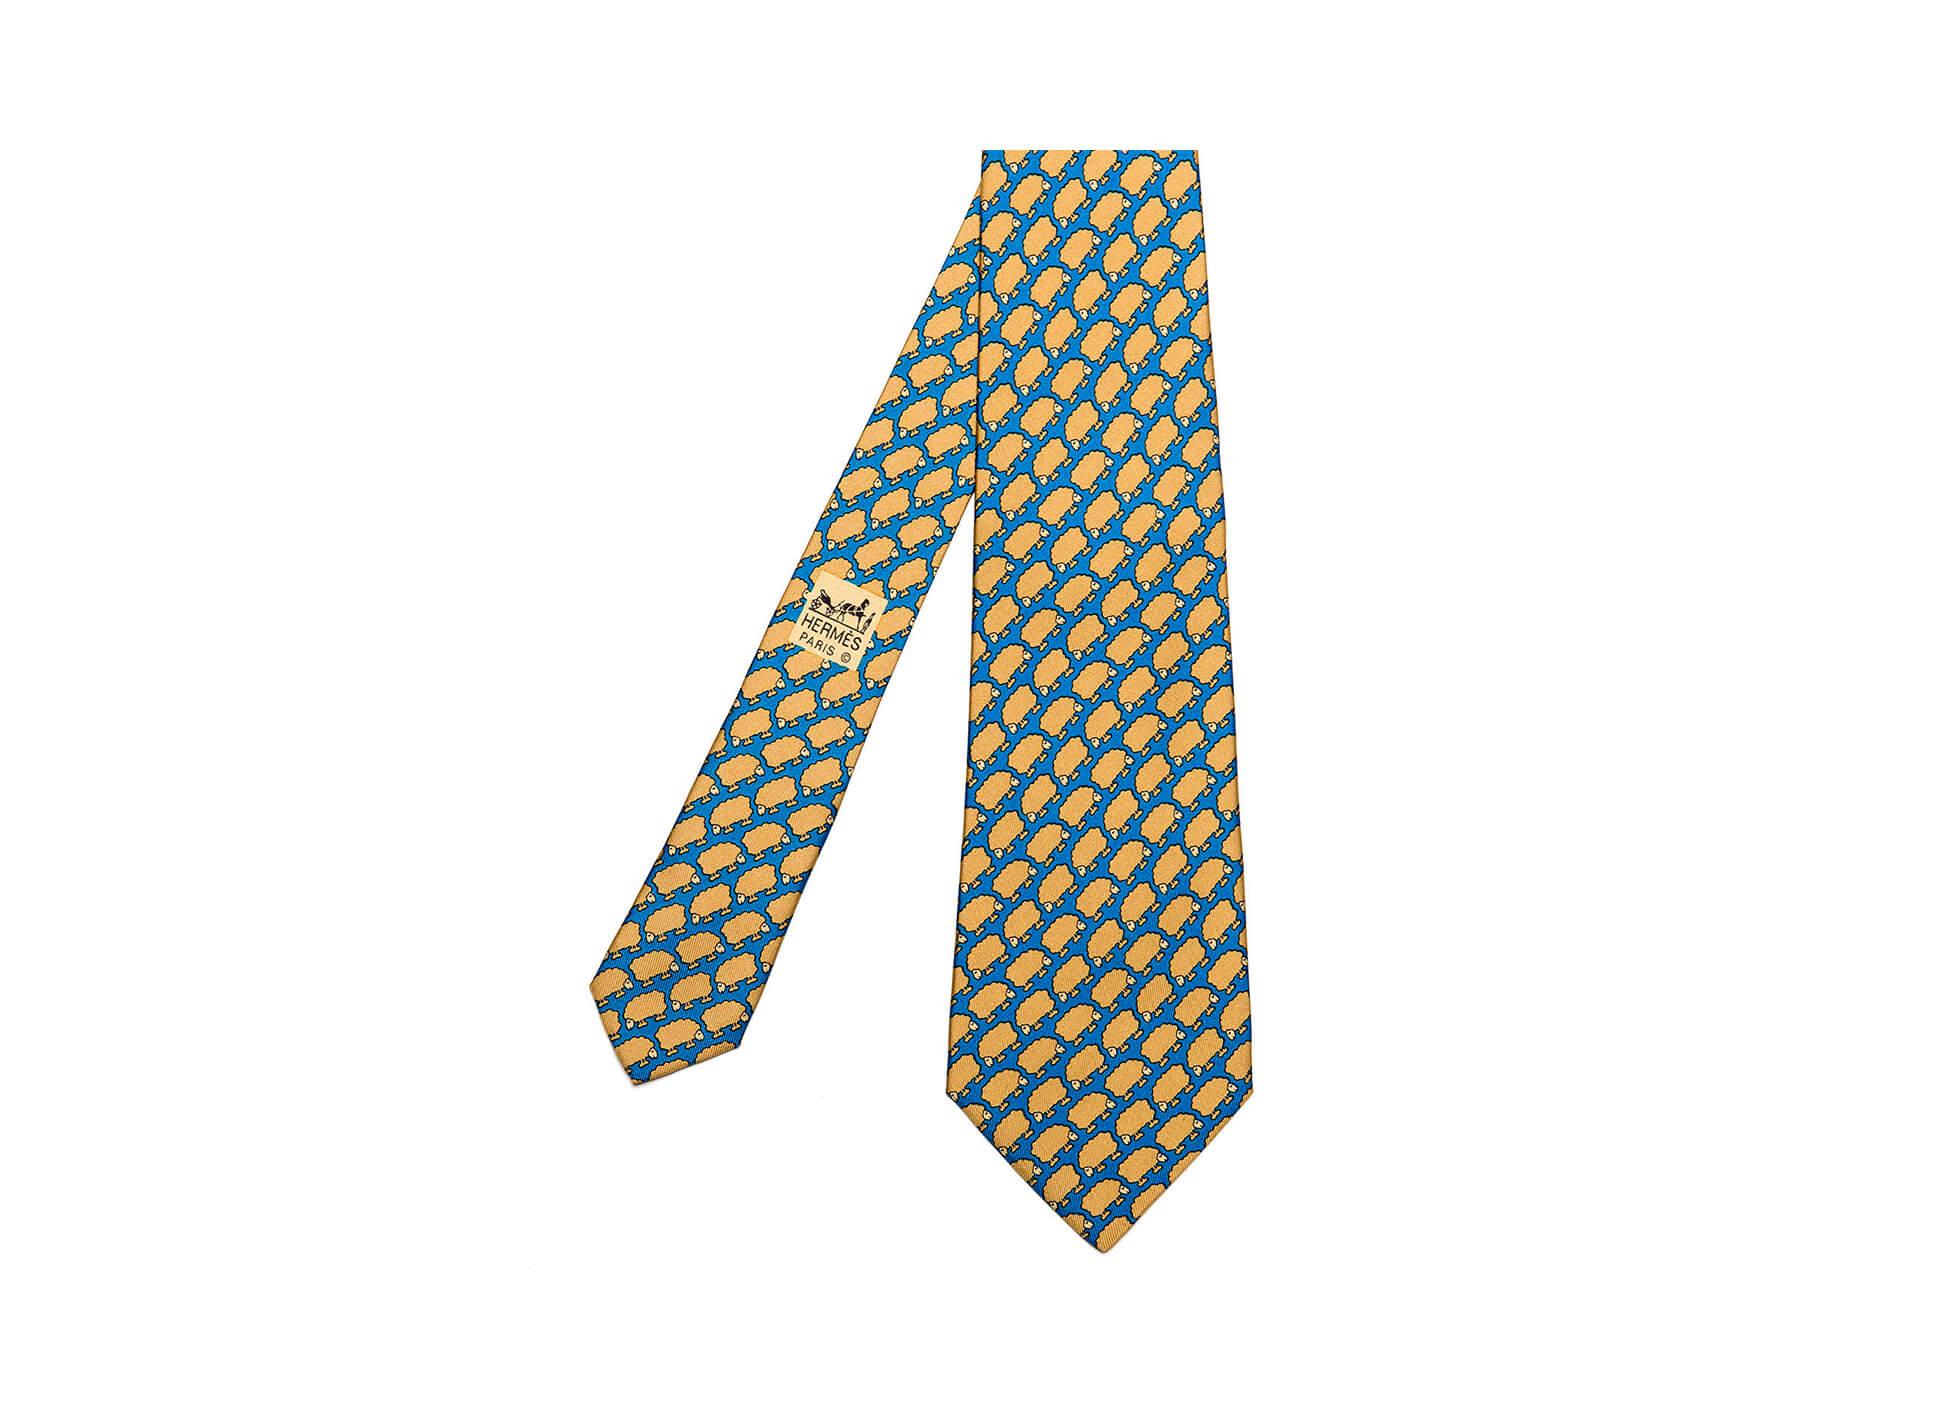 Tres Chic Hermes Vintage Silk Tie. 'Sheep' is a classic Hermes design and in unused, pristine condition.